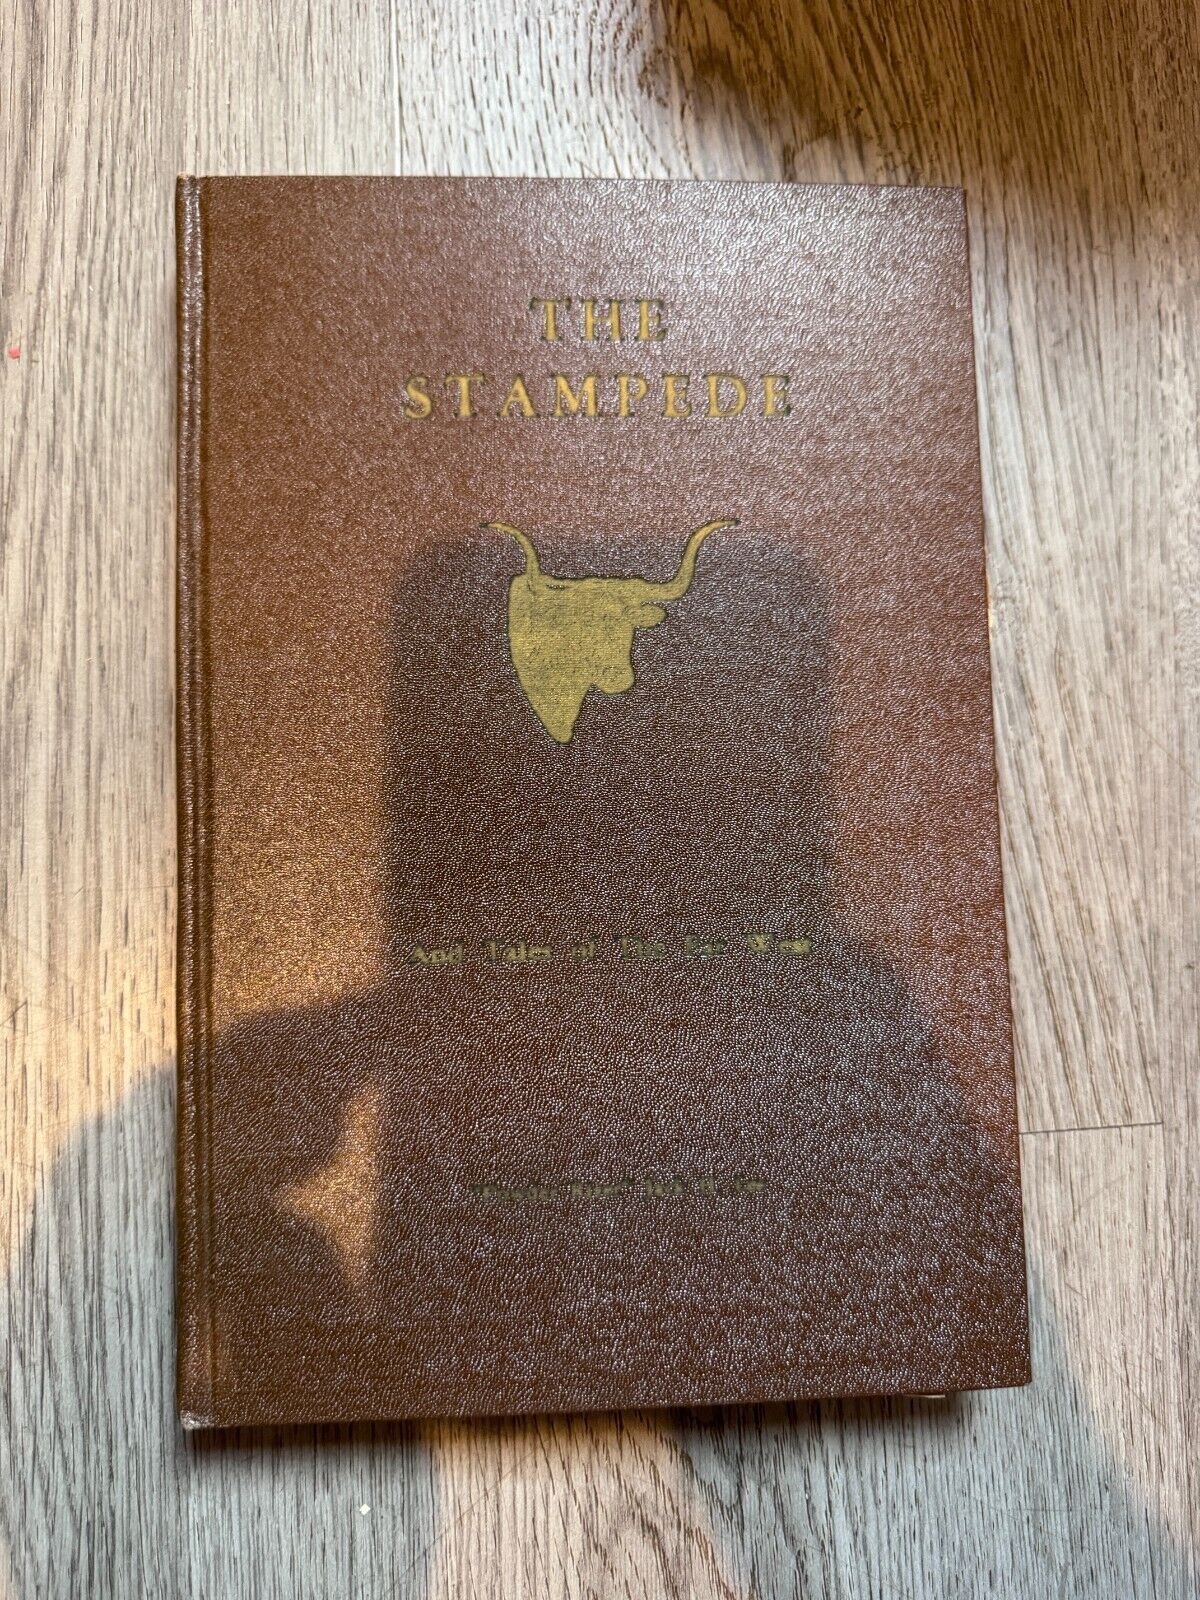 The Stampede & Other Tales Of The Far West, Jack H. Lee, Kitty Lee- Signed/Inscr